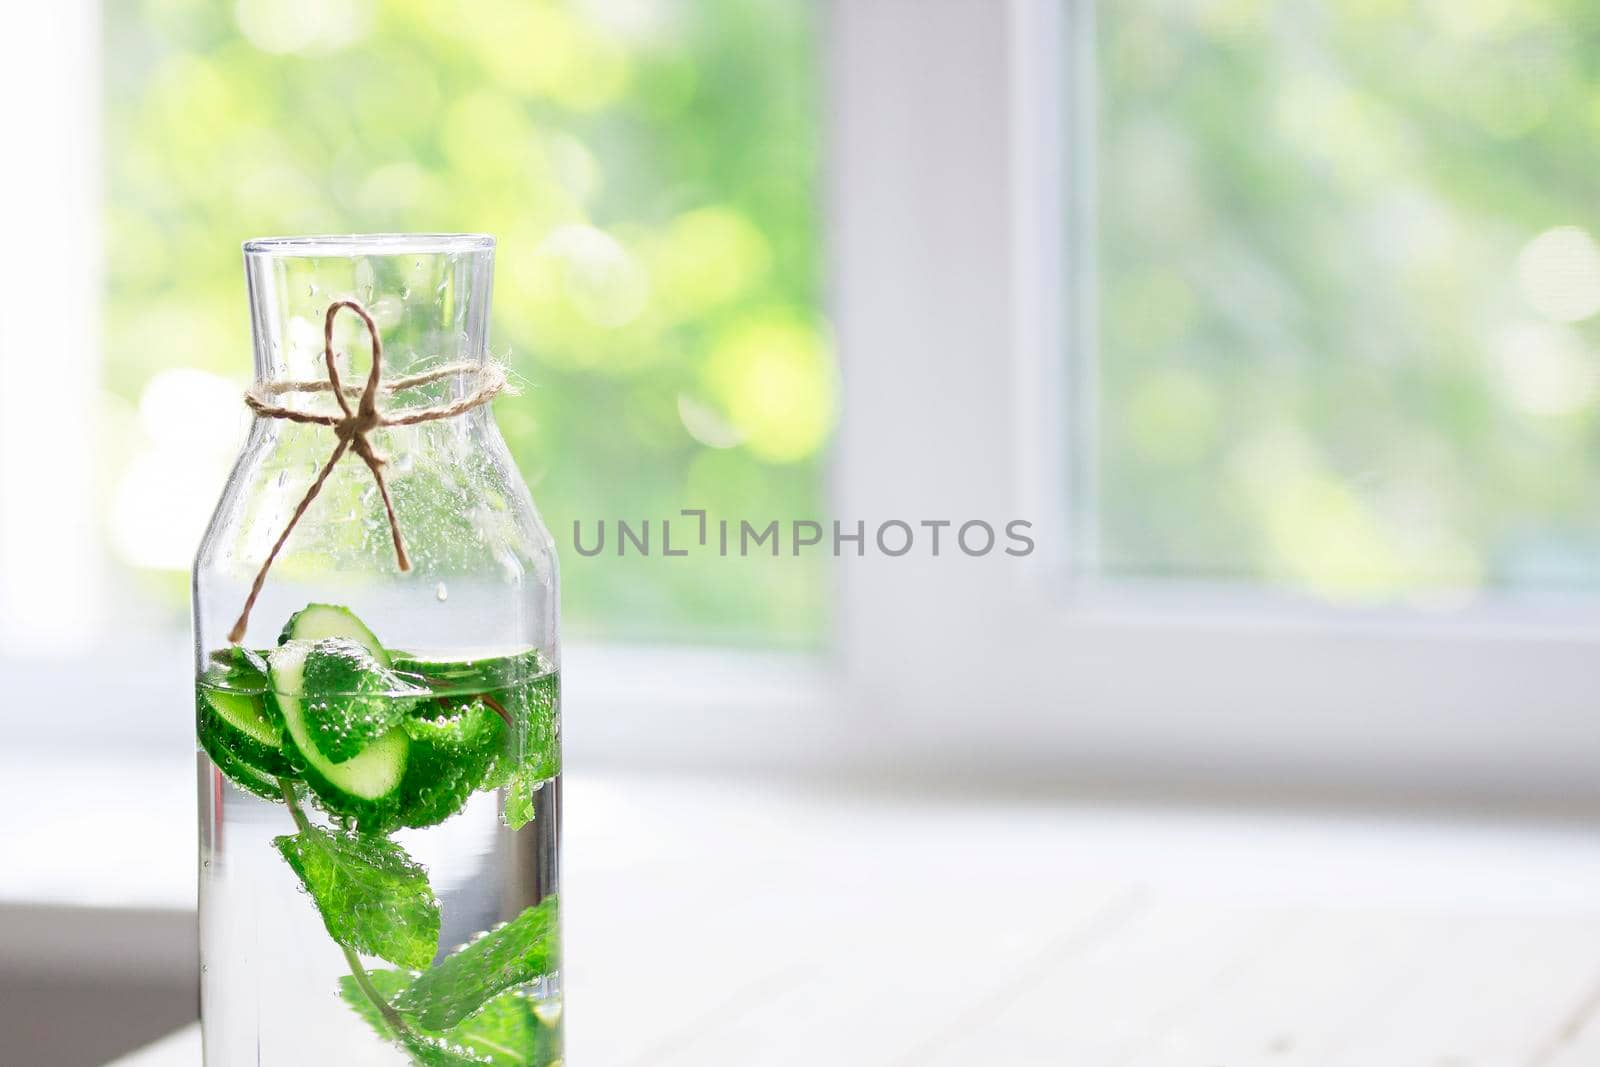 Nutritious detox water or emonade with cucumber and mint on table near window. Copy space for text.